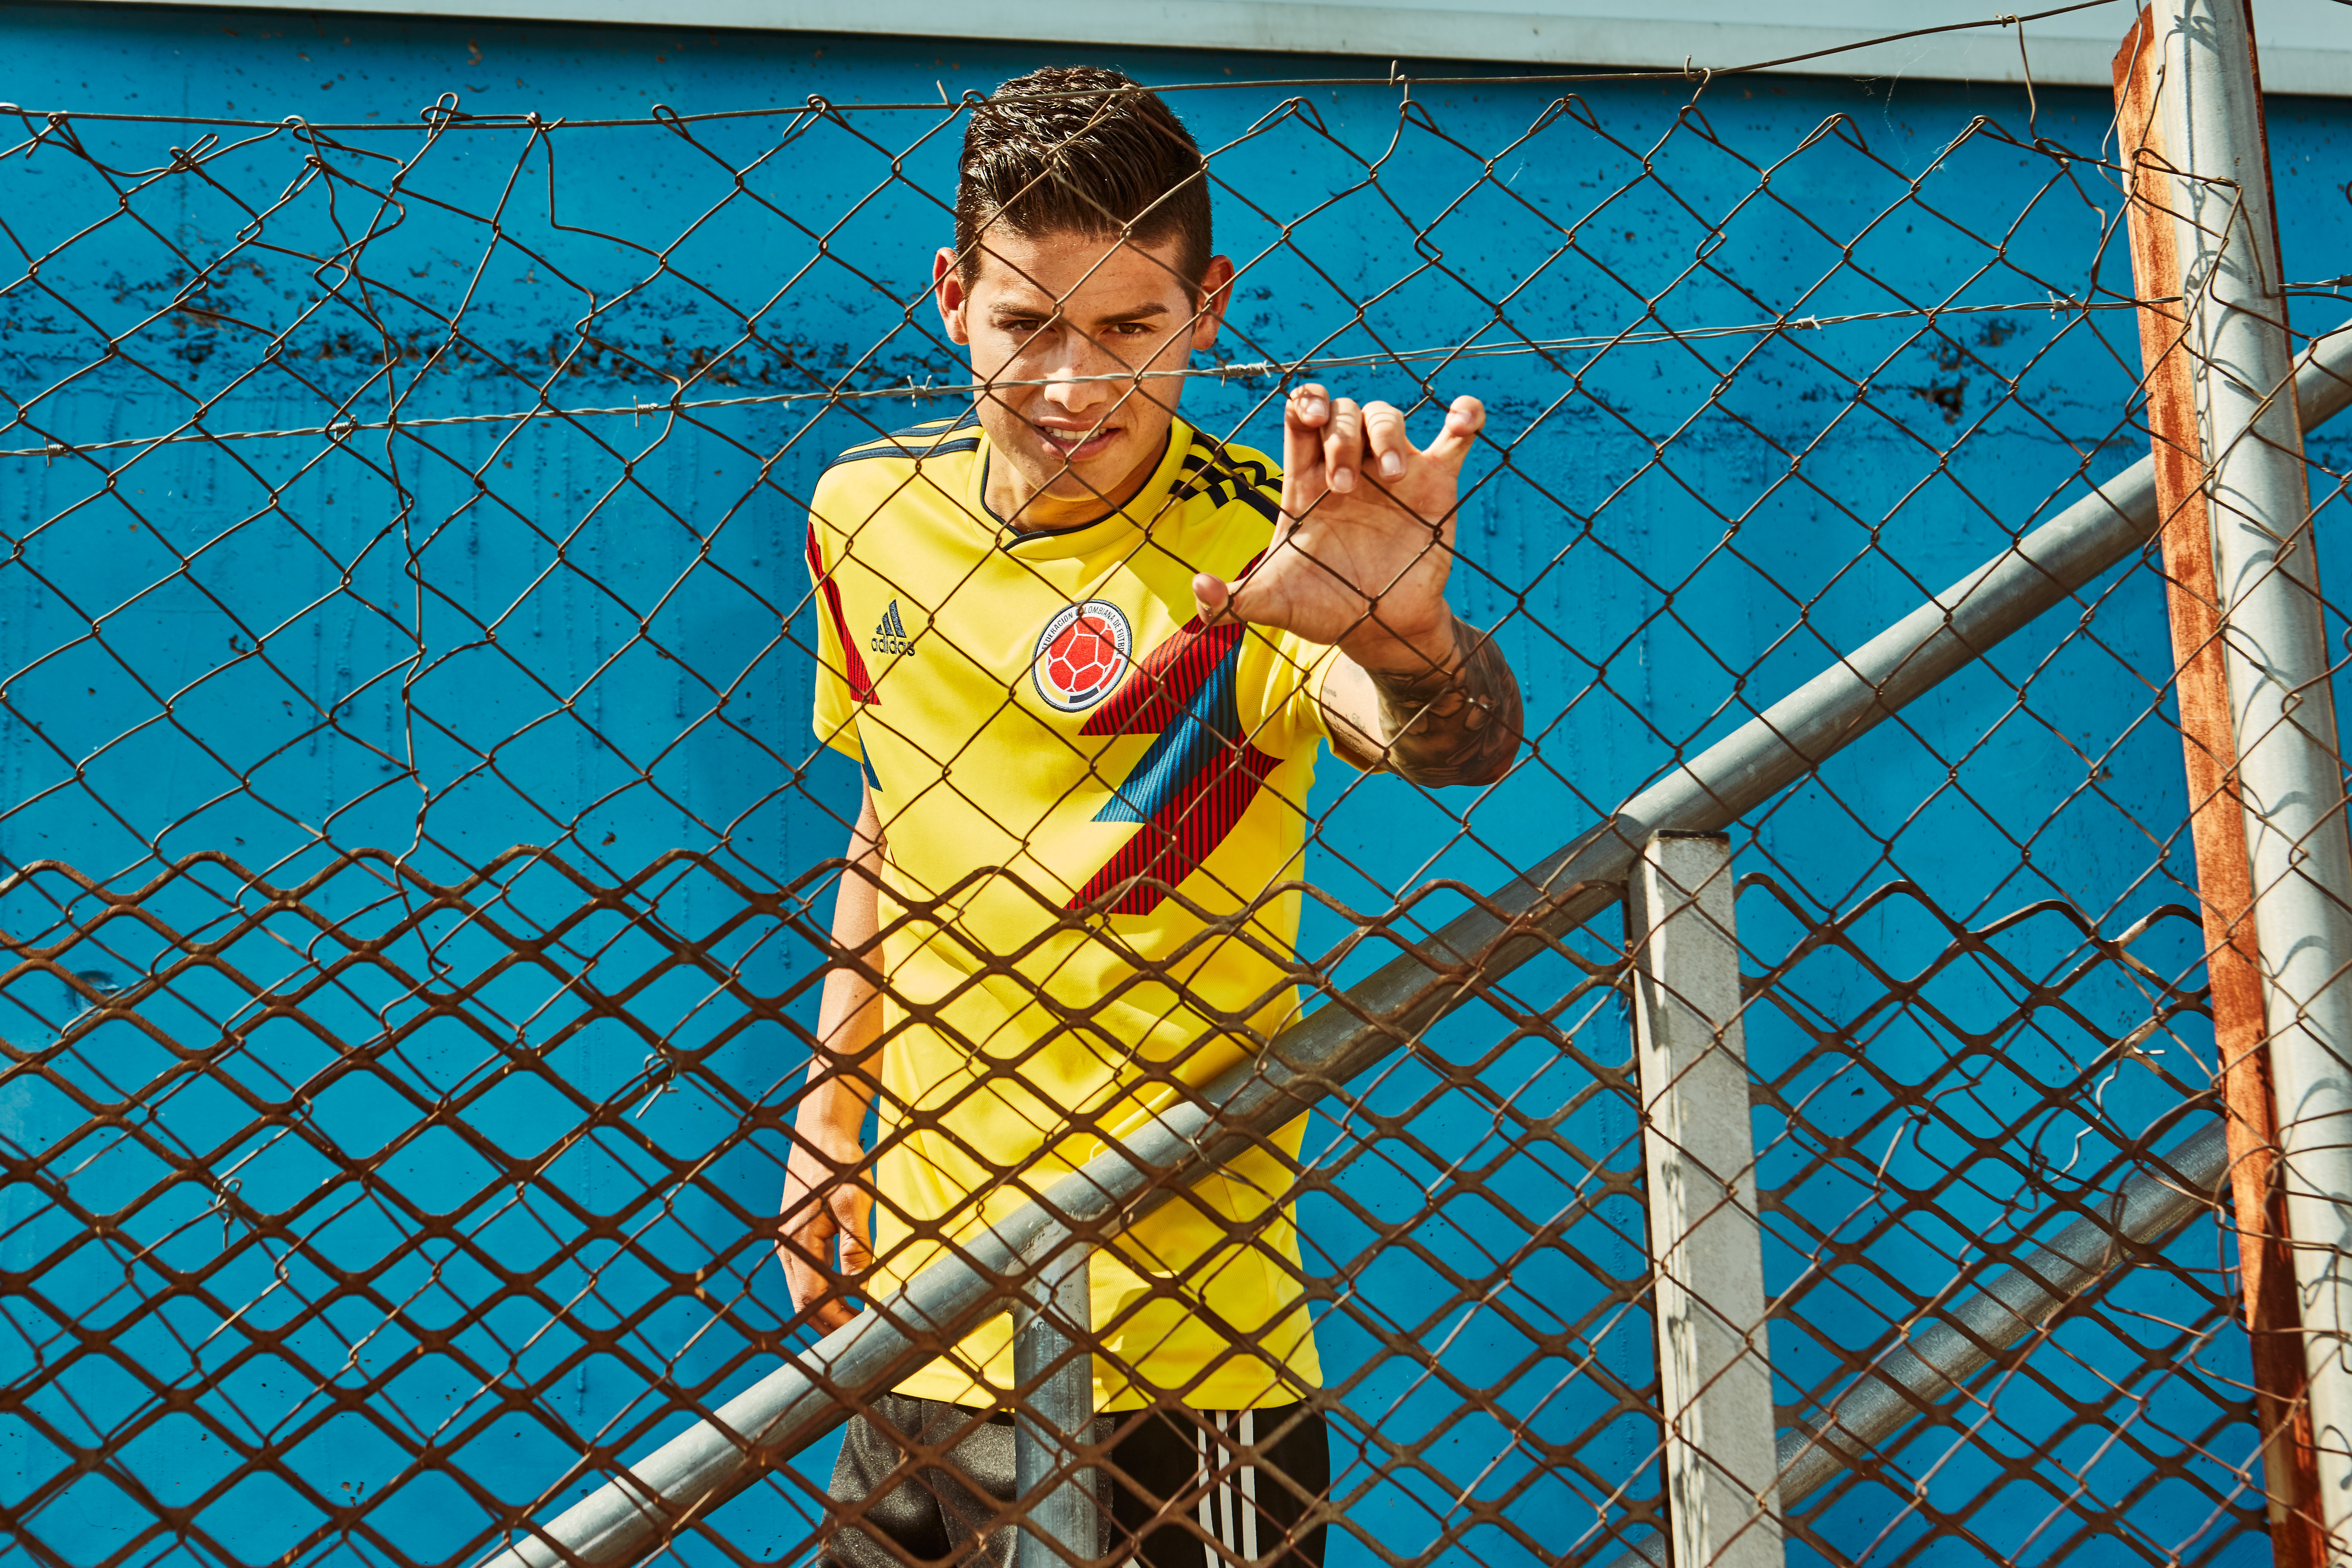 adidas Reveals Its Lineup of Federation Kits for the FIFA World